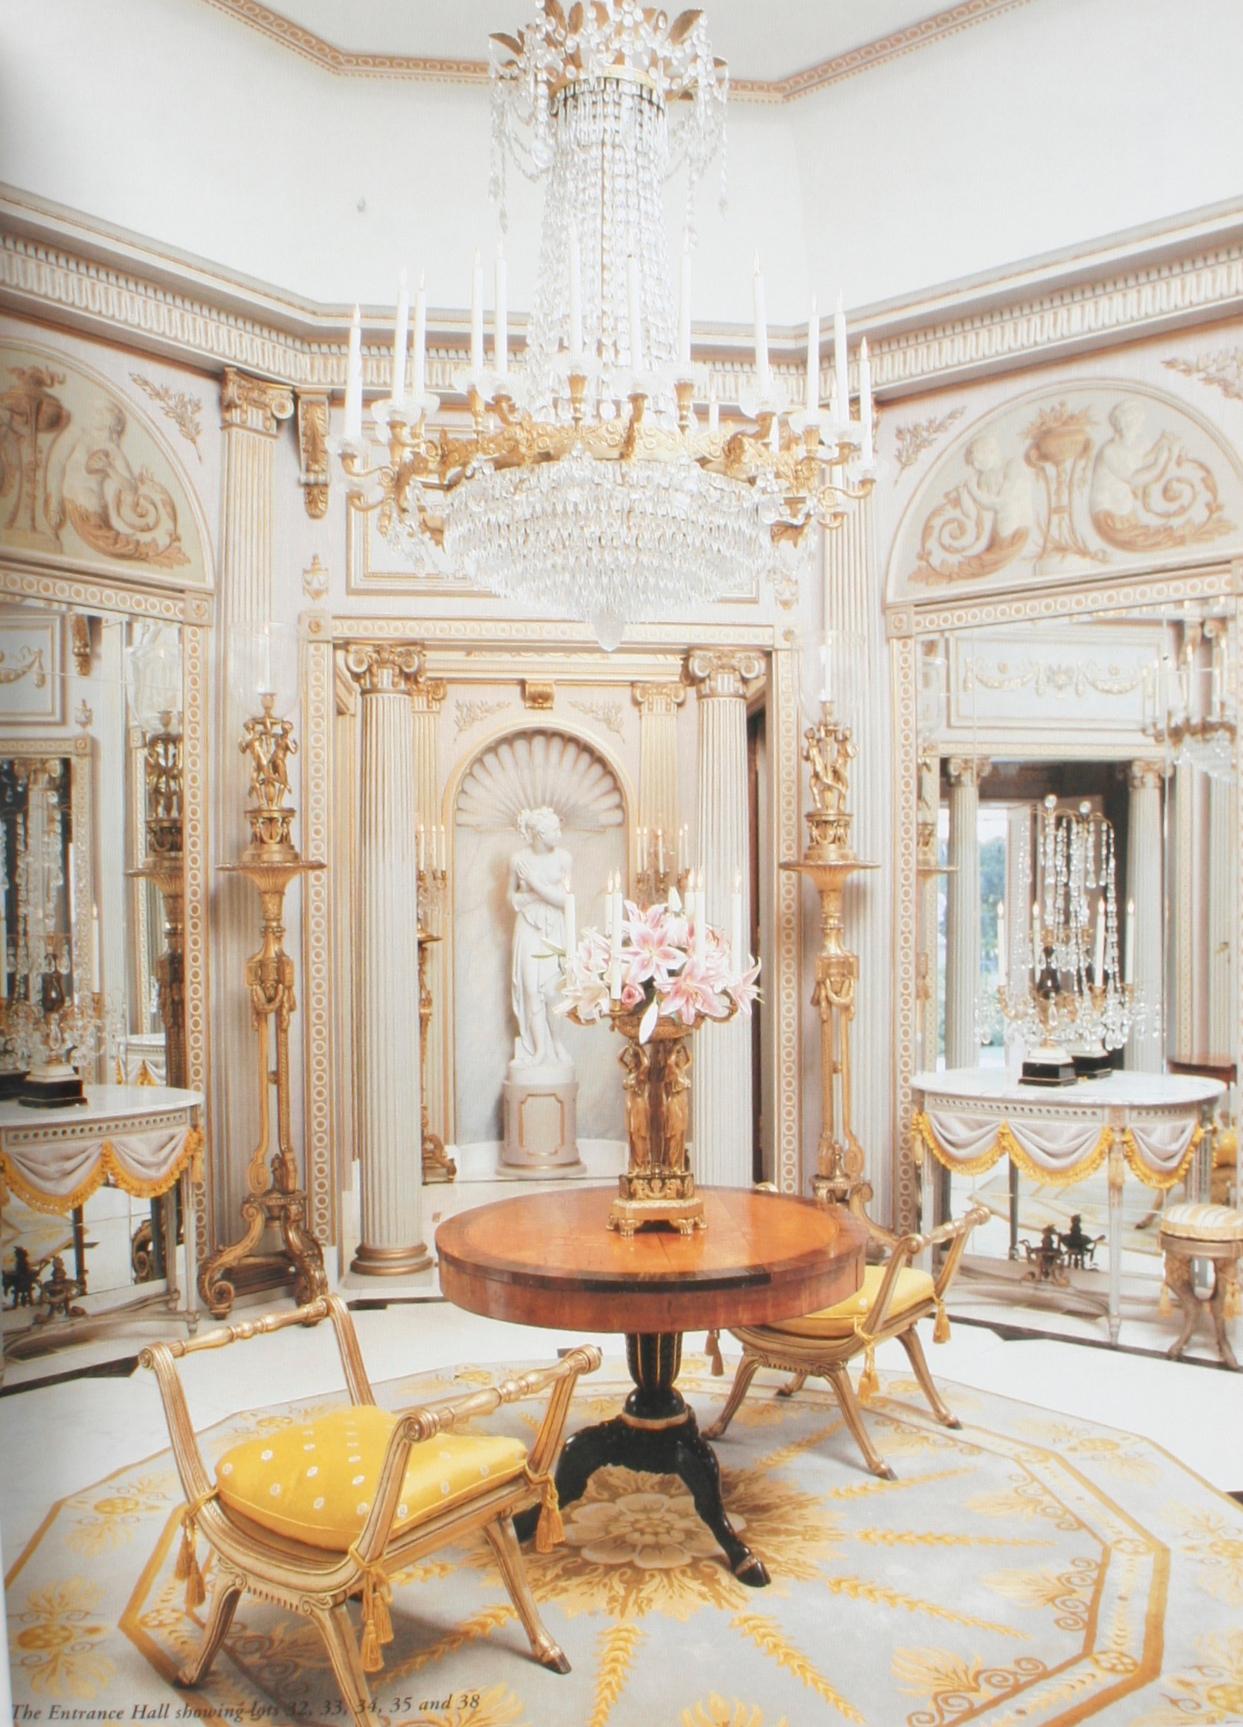 American Sotheby's: French Furniture, Works of Art and Paintings, Mary & E.R. Albert Jr